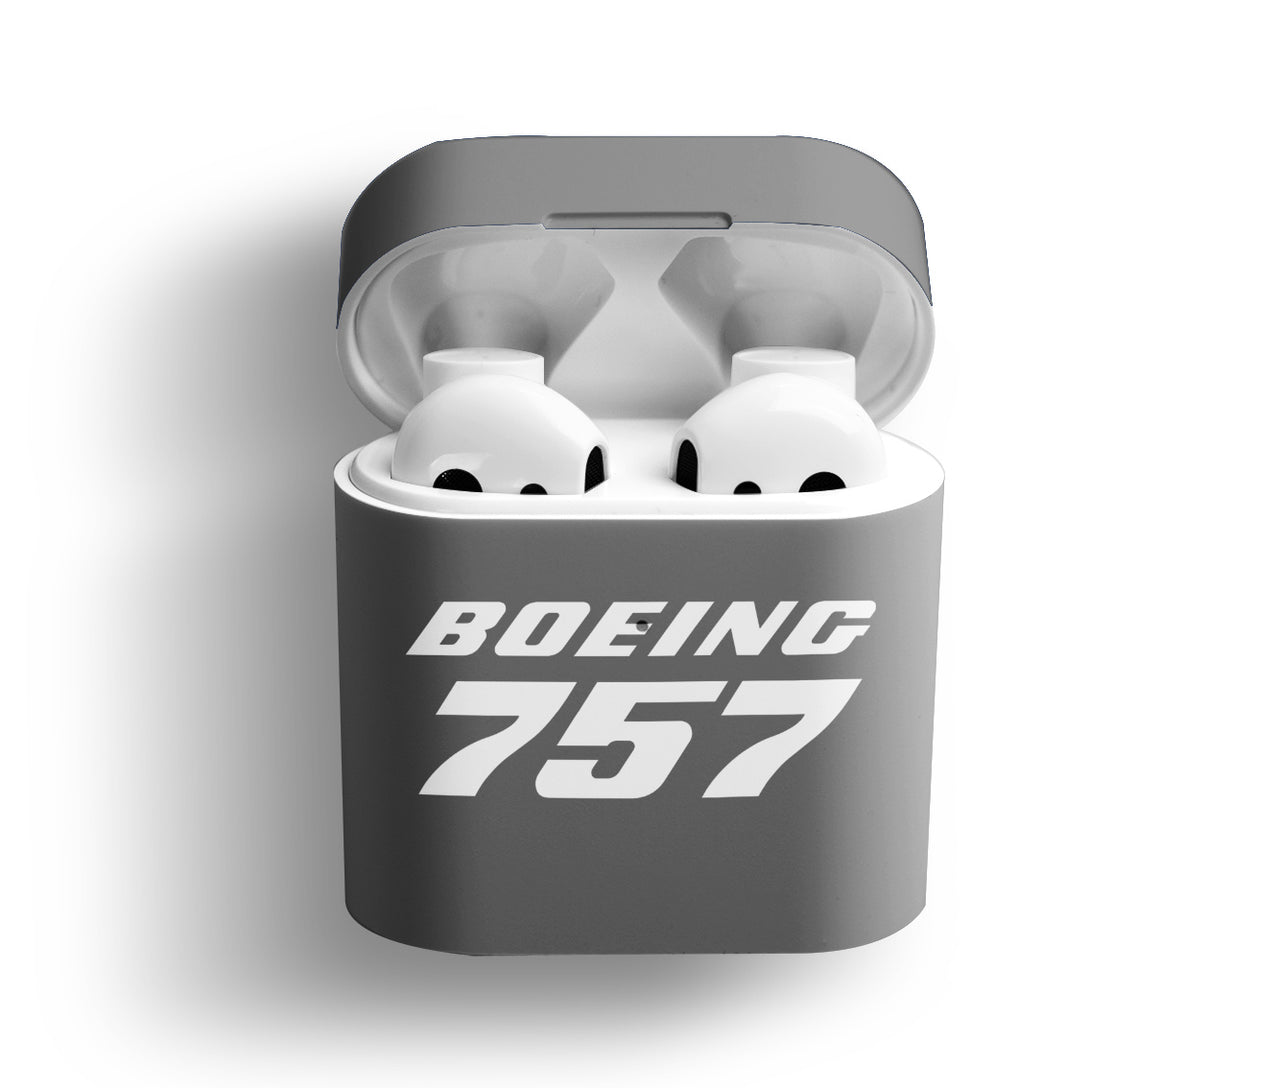 Boeing 757 & Text Designed AirPods  Cases